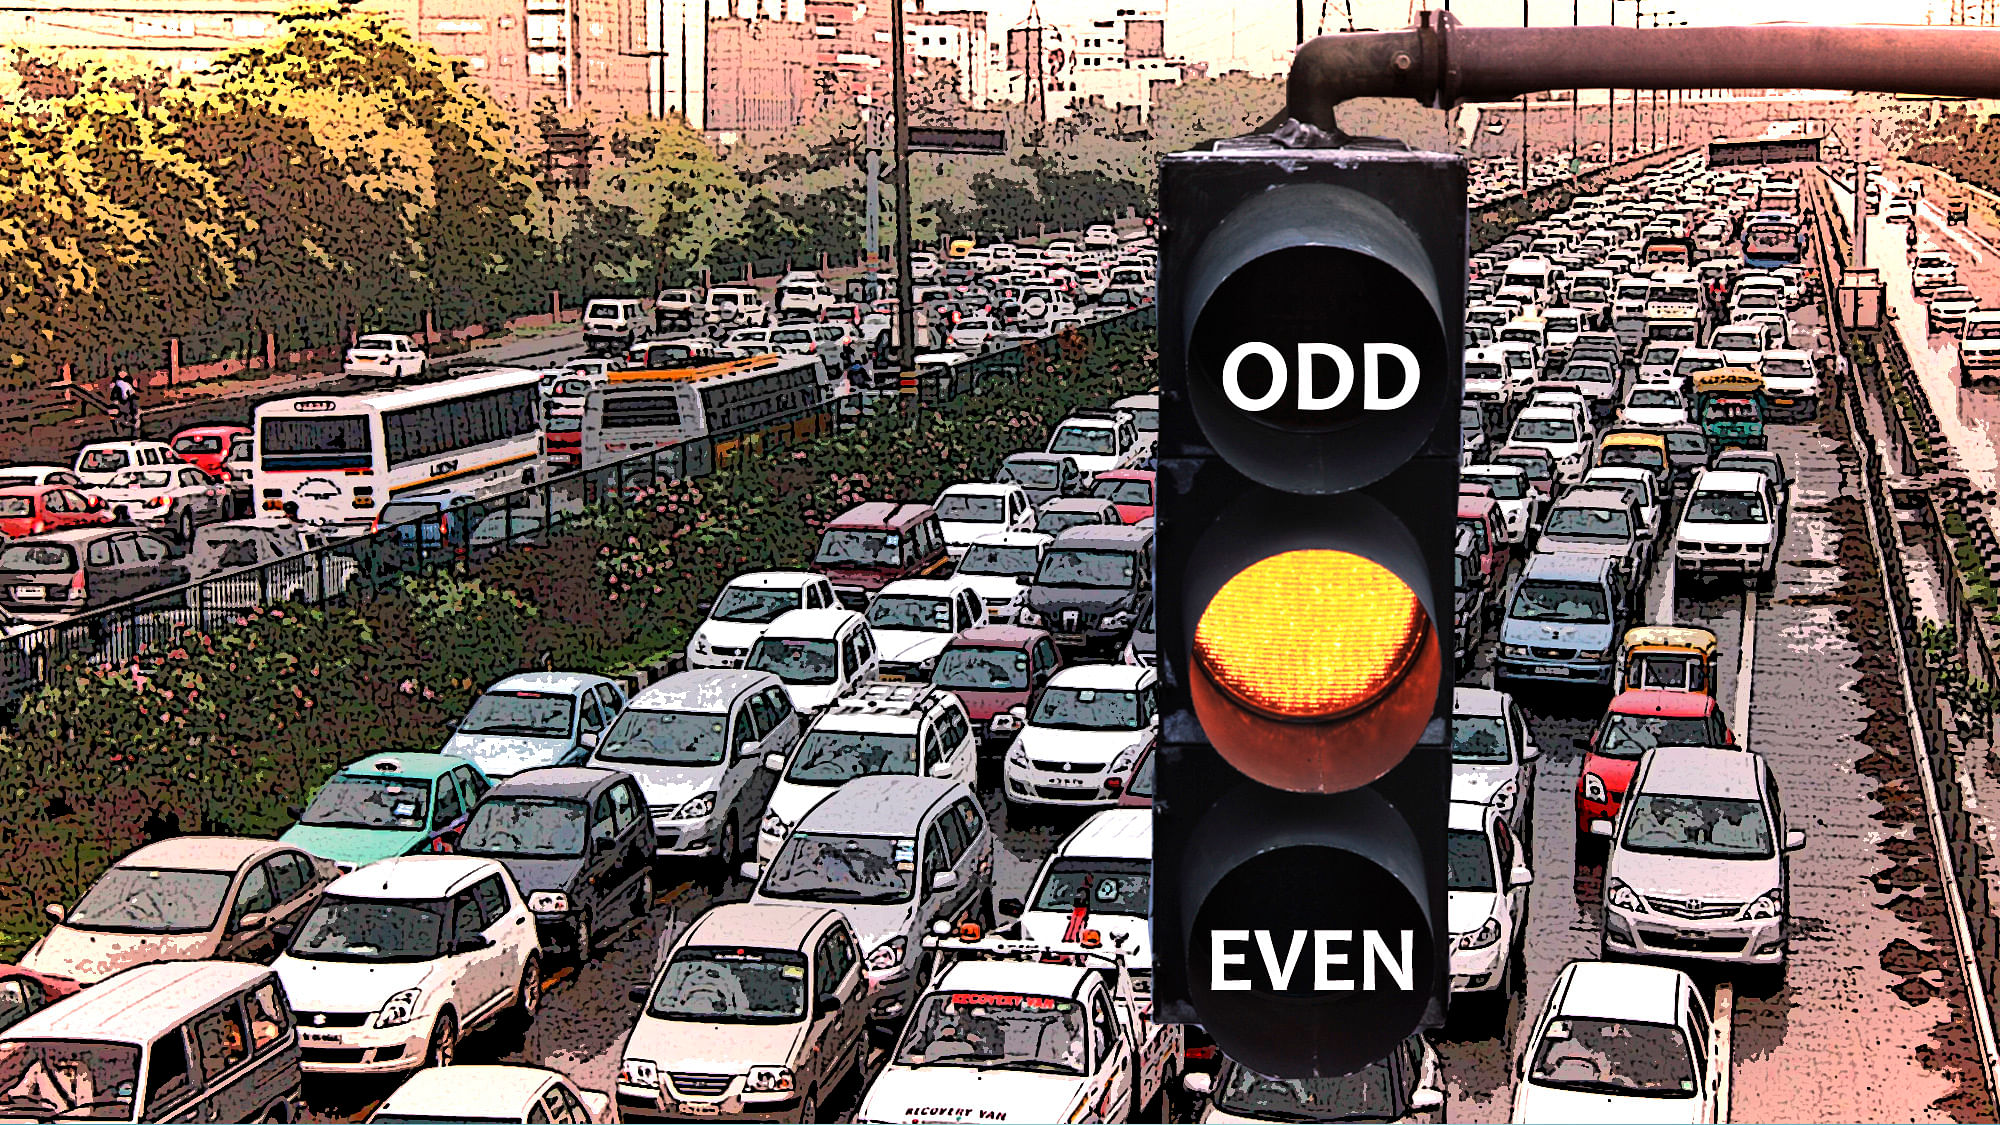 The odd-even experiment is supposed to reduce pollution levels in one of the most polluted cities in the world. (Photo: Atered by <b>The Quint</b>)